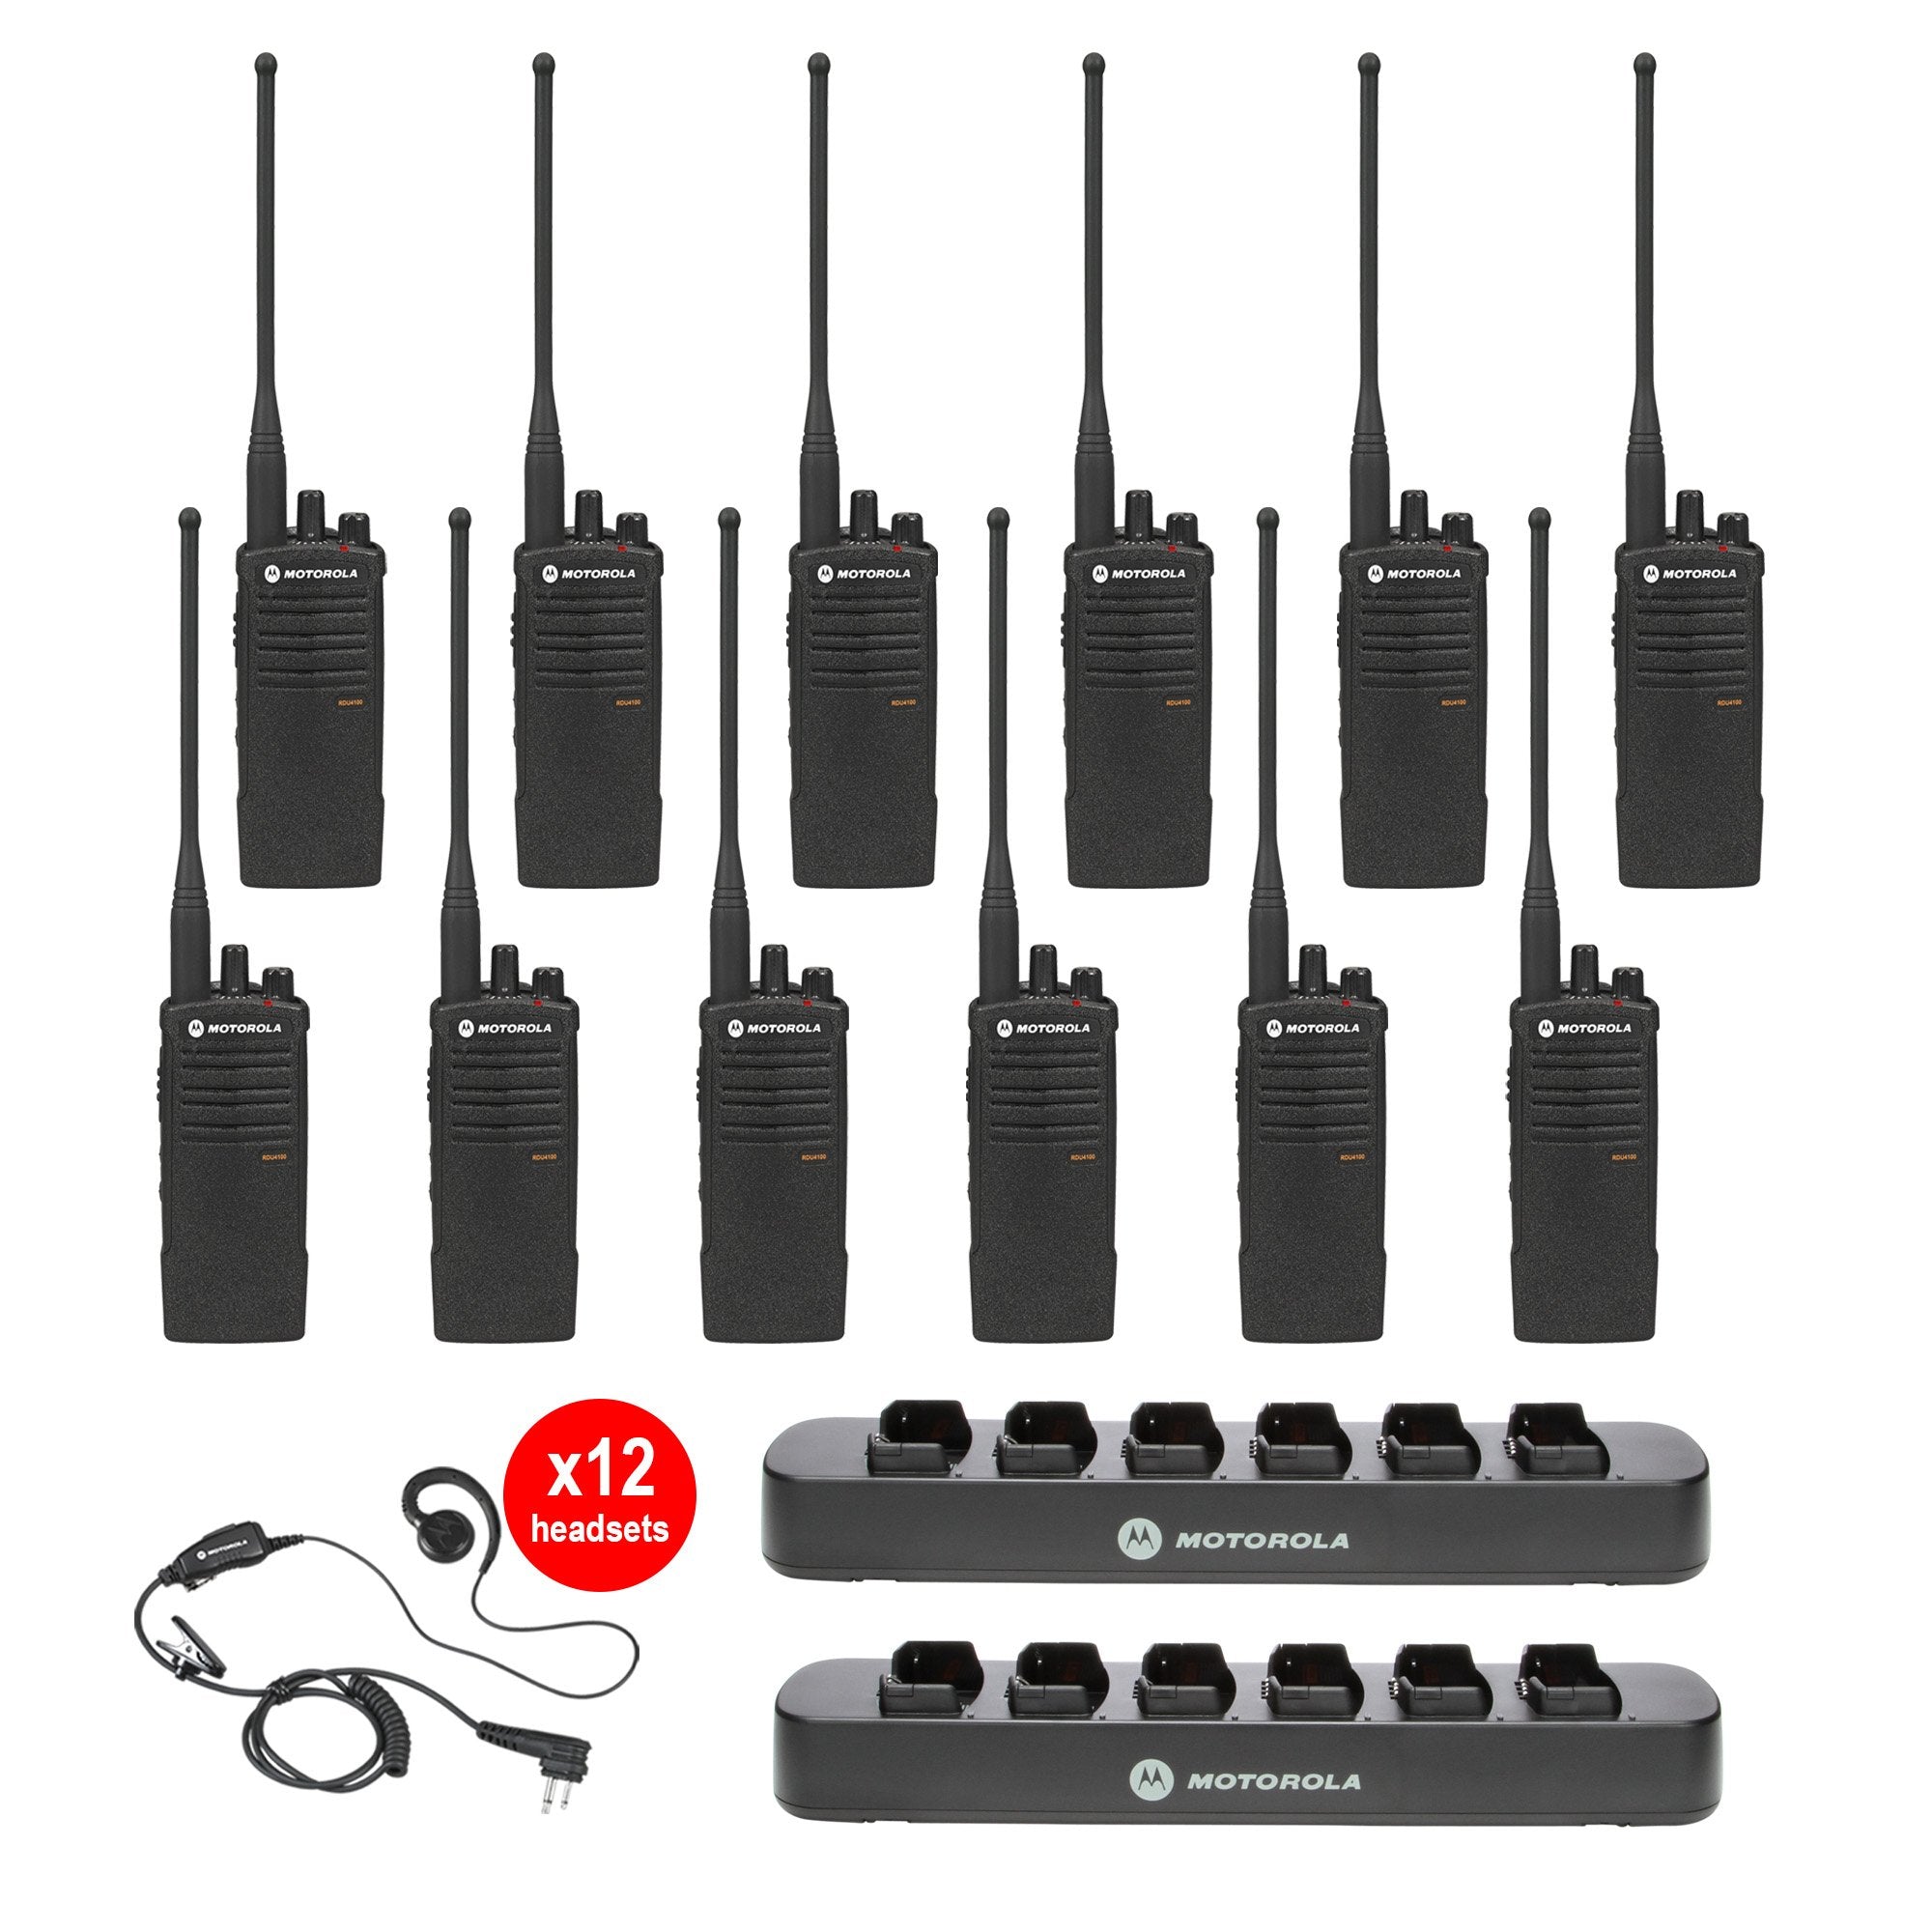 RDU4103 12 Pack Bundle with Multi Unit Chargers and Headsets